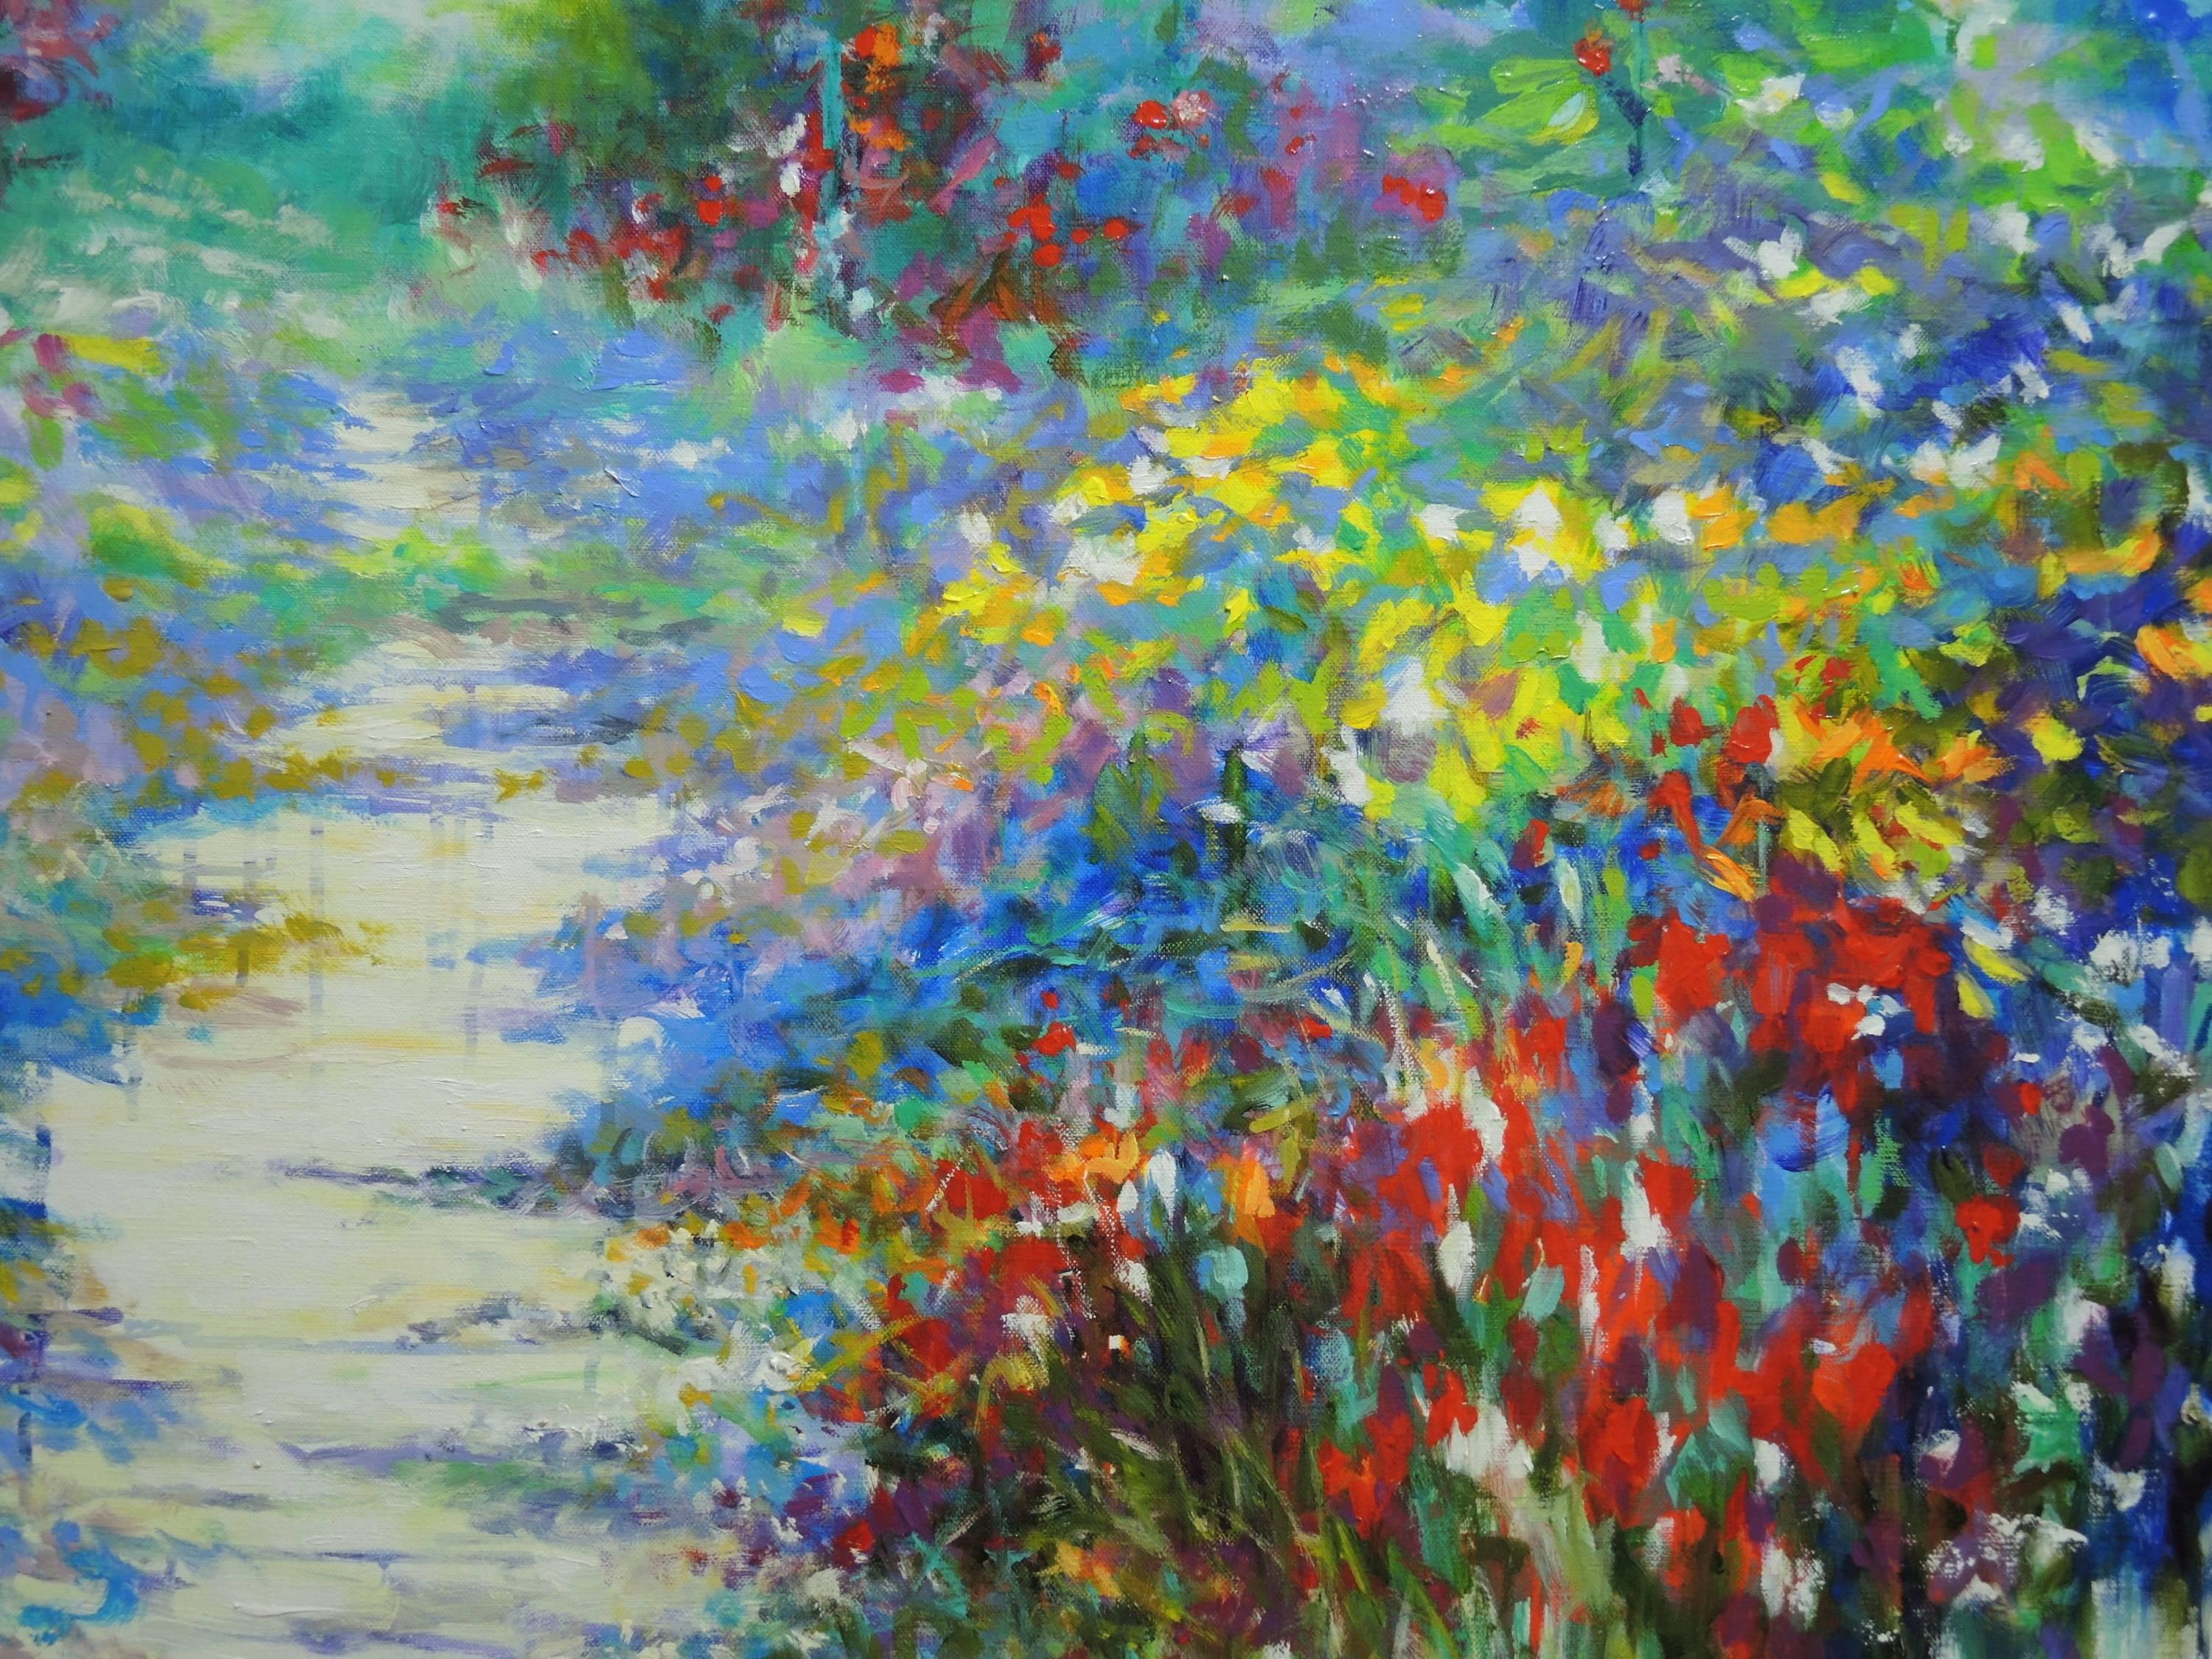 Sommerspaziergang in Giverny, halb abstraktes Blumengemälde  – Painting von Mary Chaplin